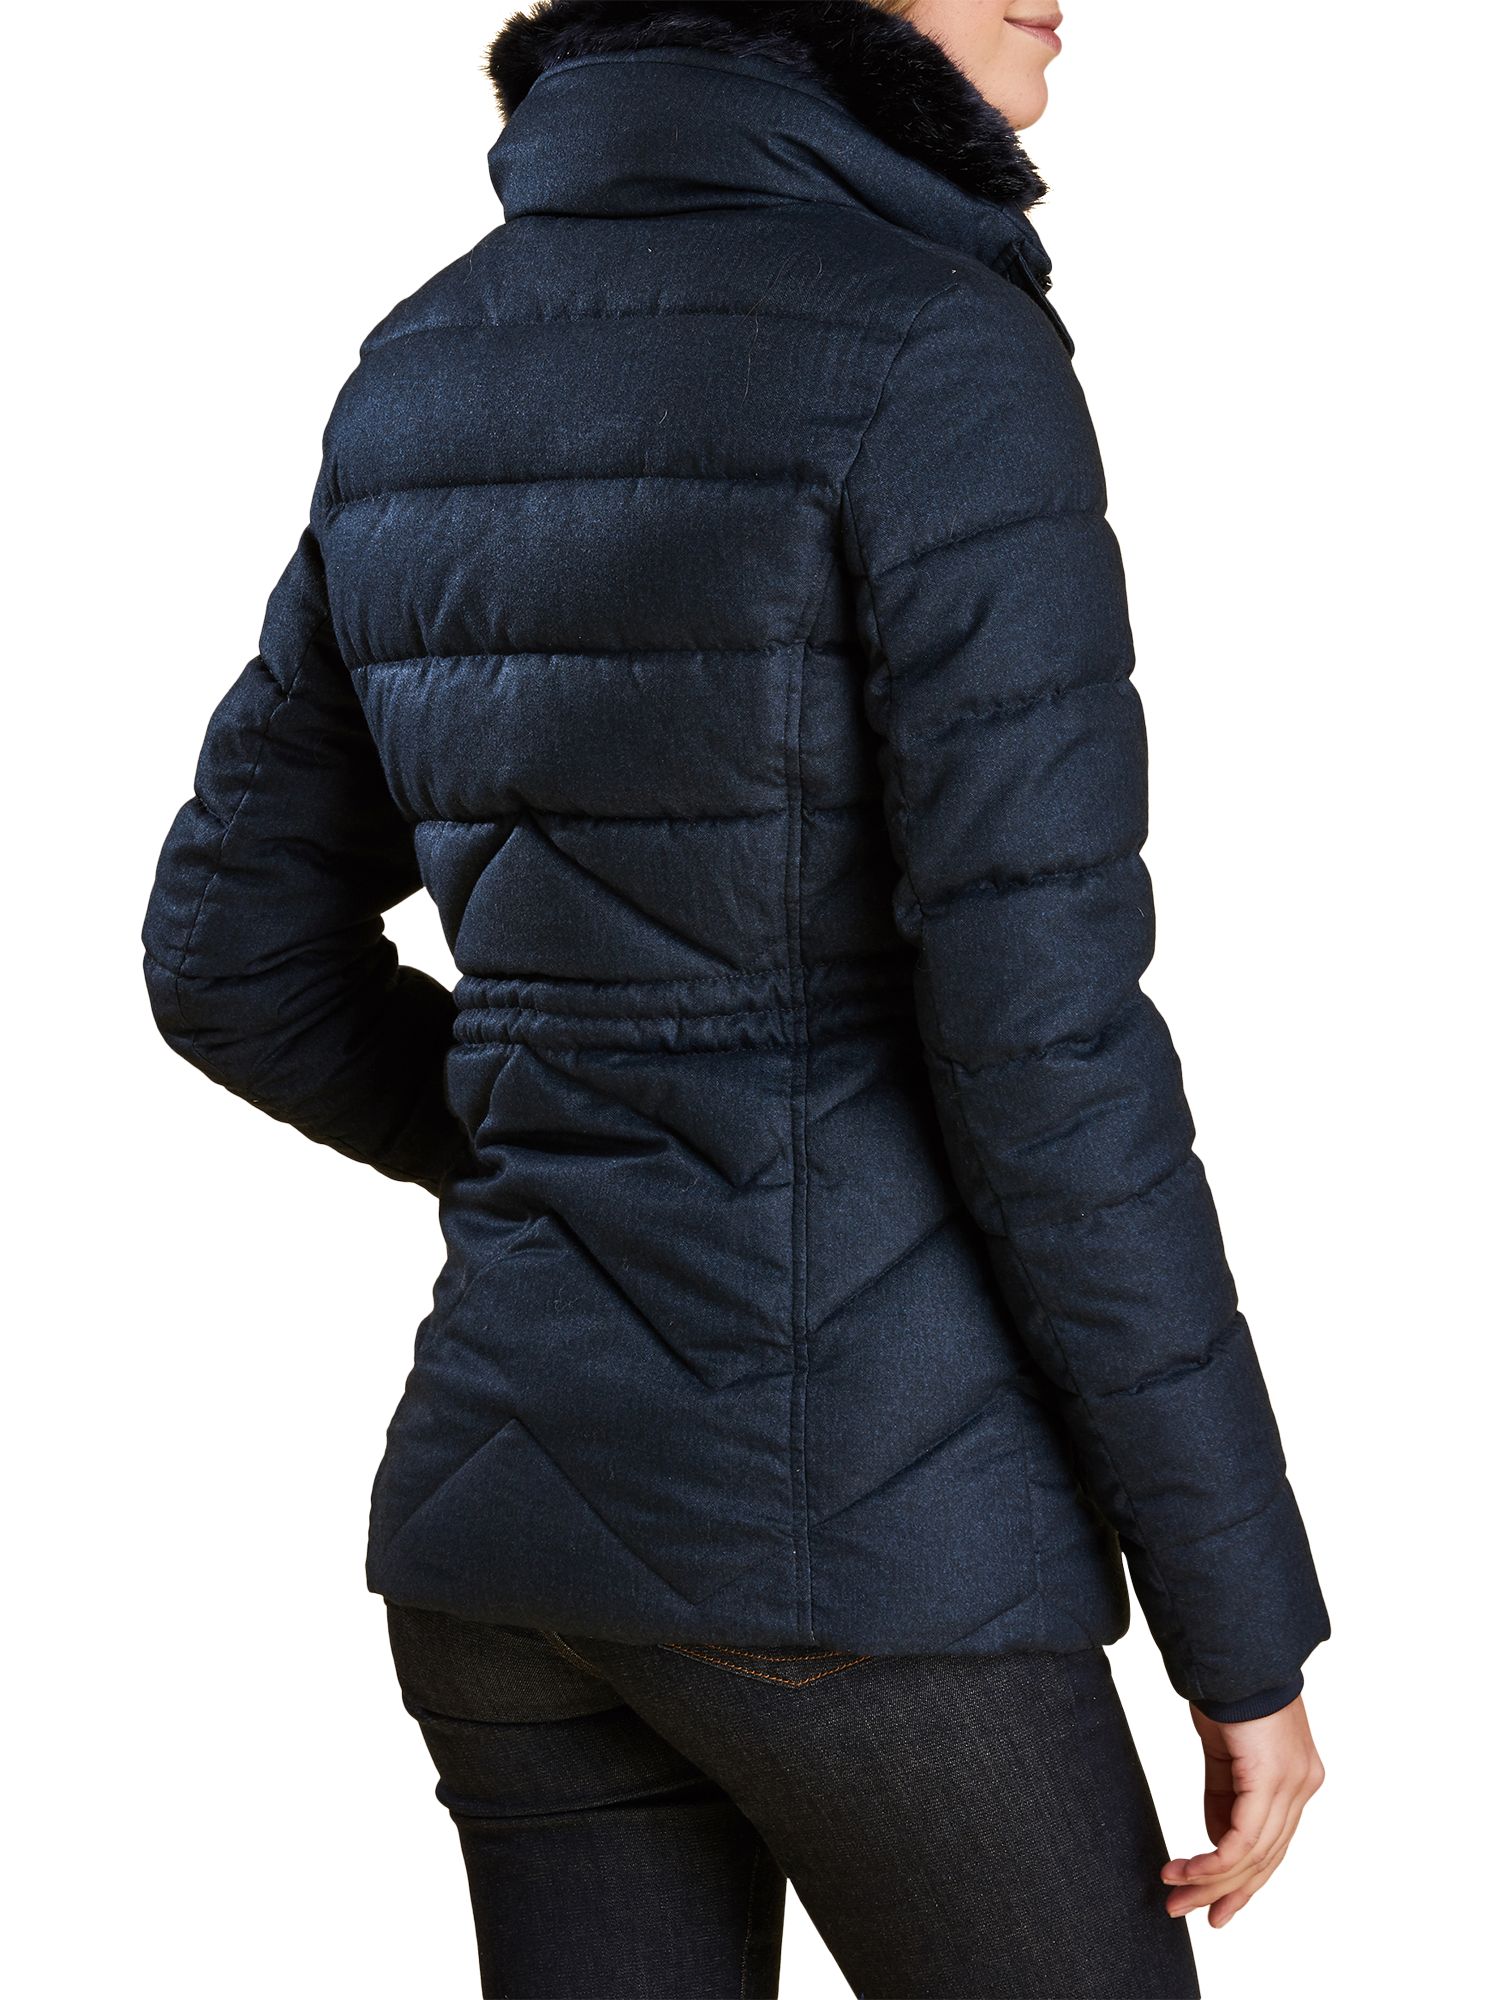 Barbour Langstone Quilted Jacket, Navy 